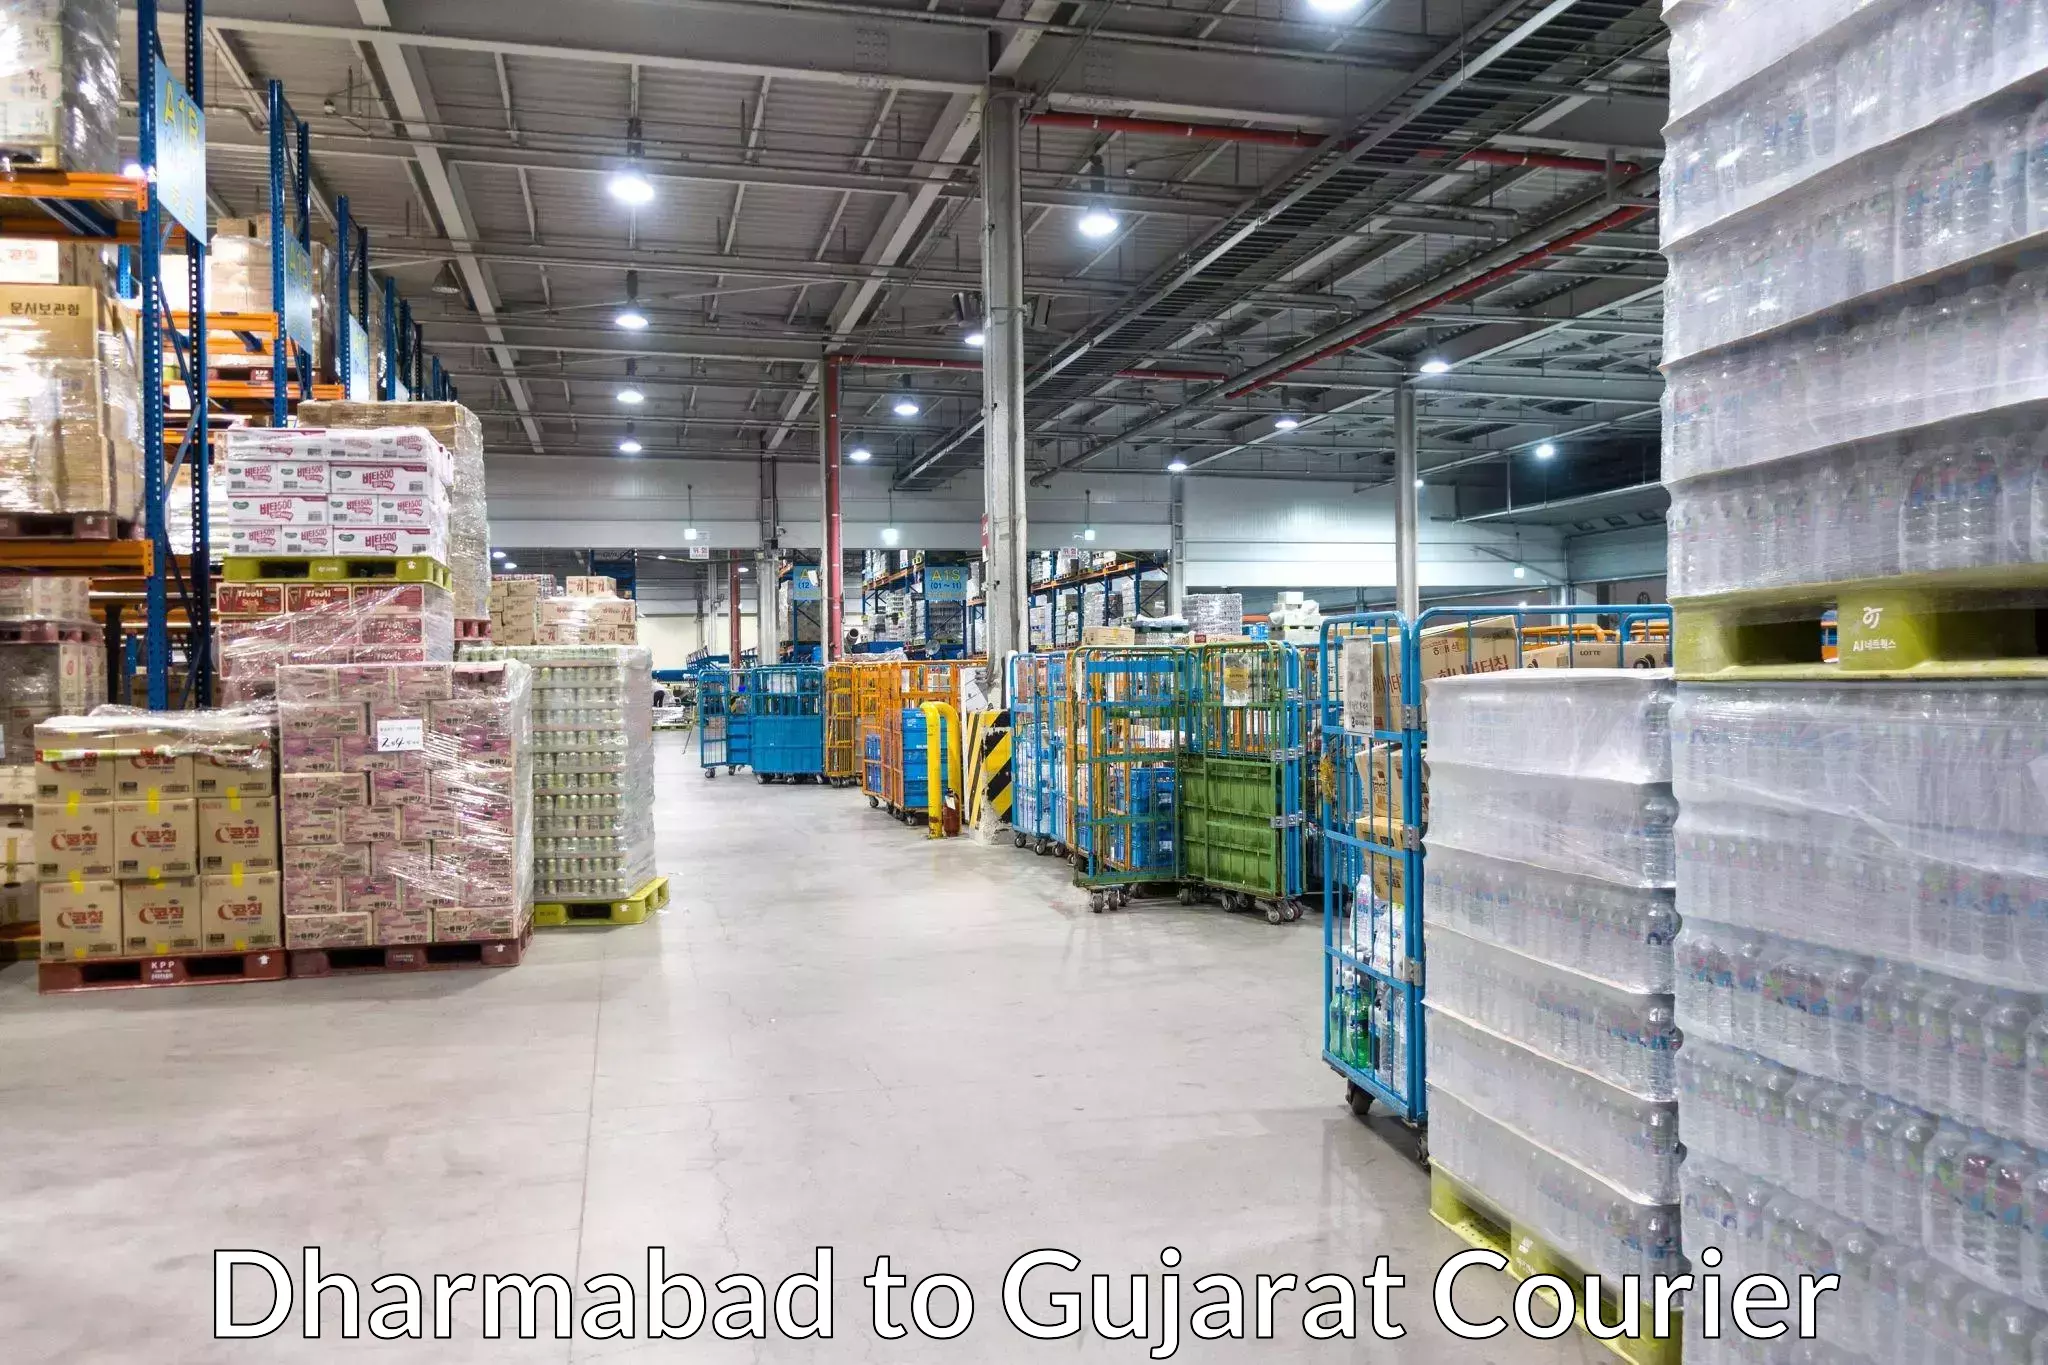 Global logistics network in Dharmabad to Wankaner